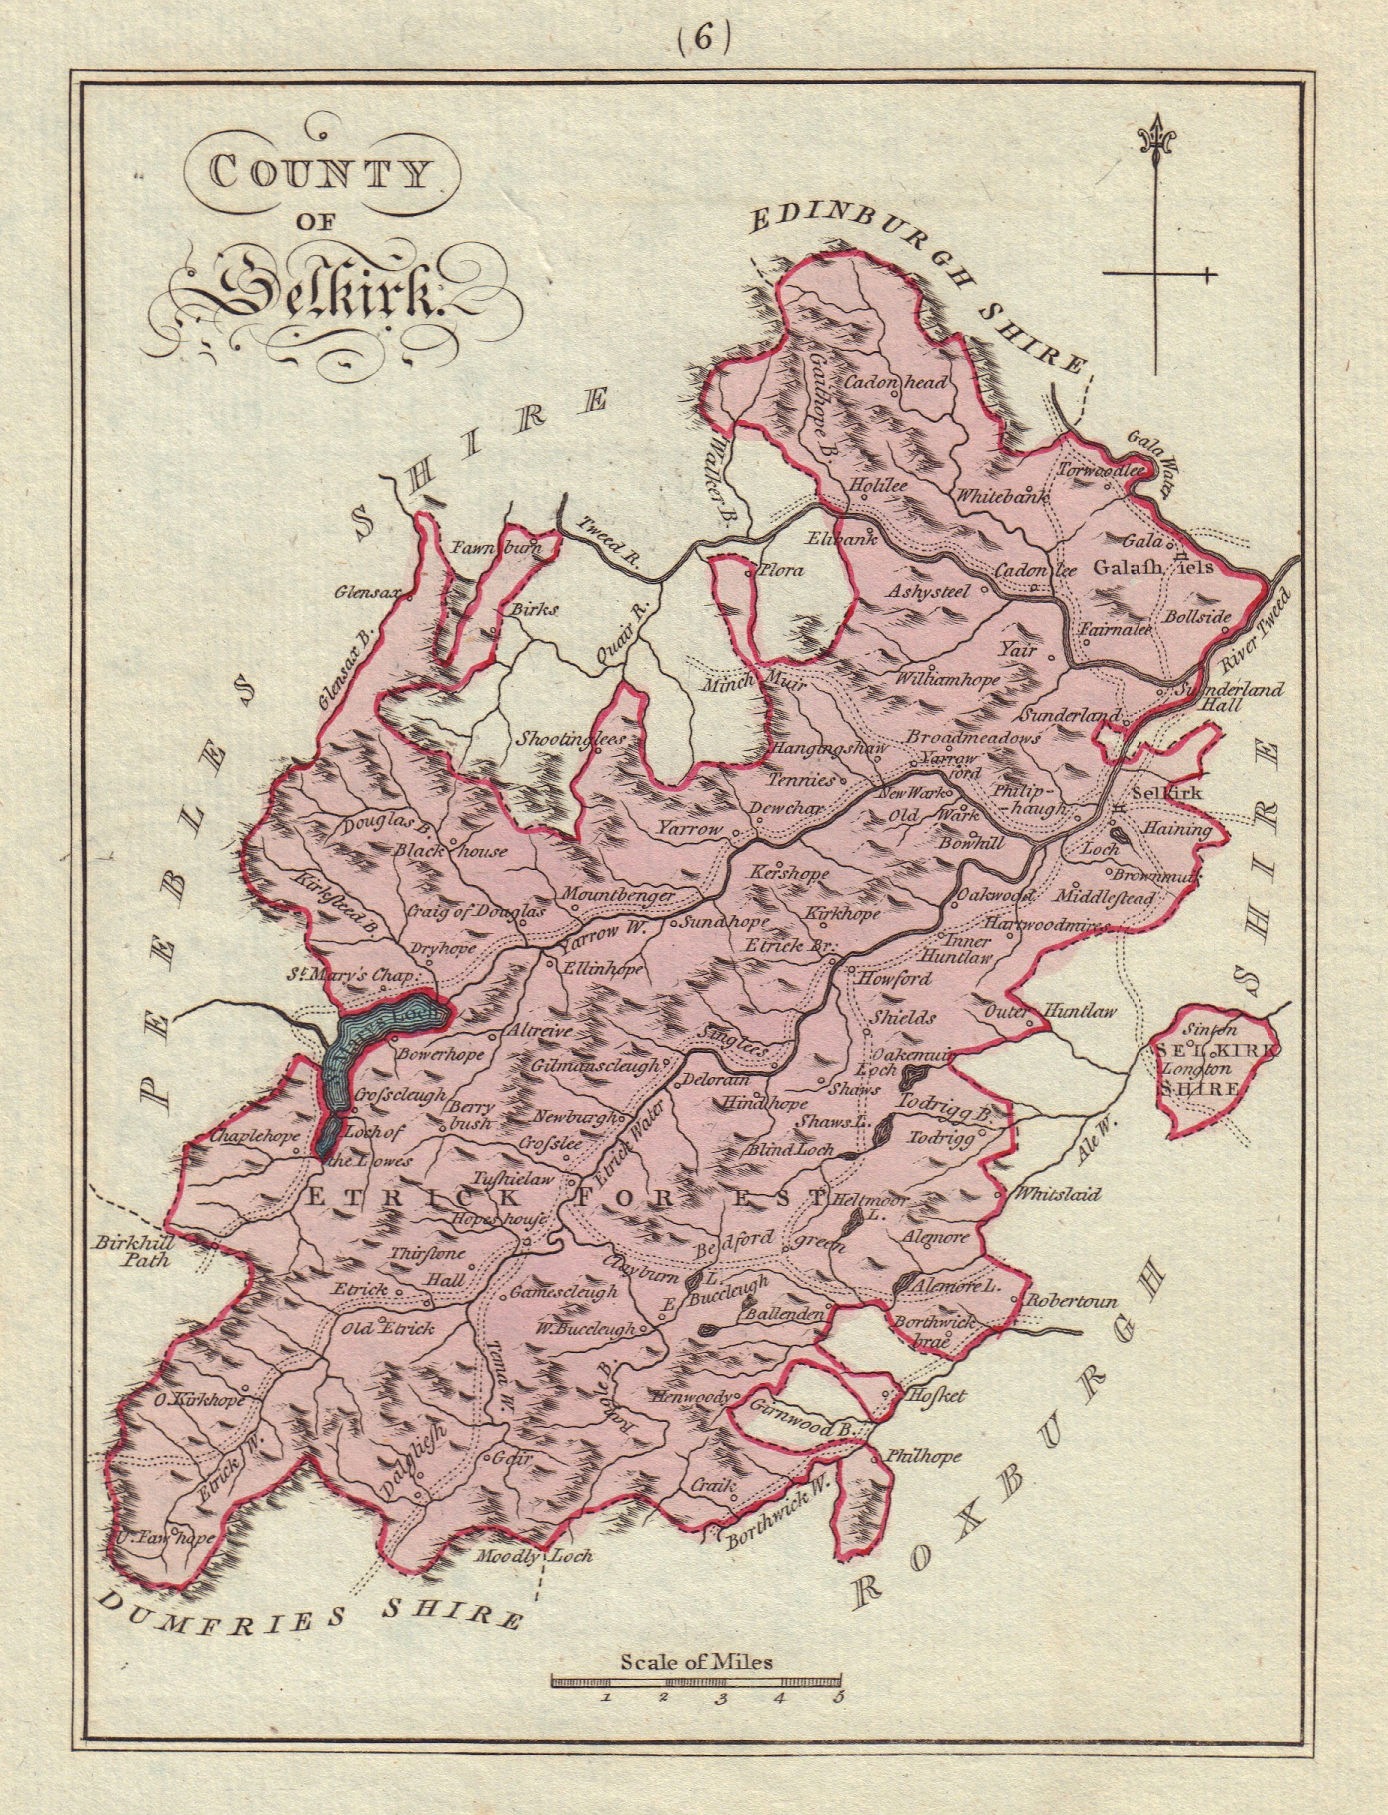 Associate Product County of Selkirk. Selkirkshire. SAYER / ARMSTRONG 1794 old antique map chart